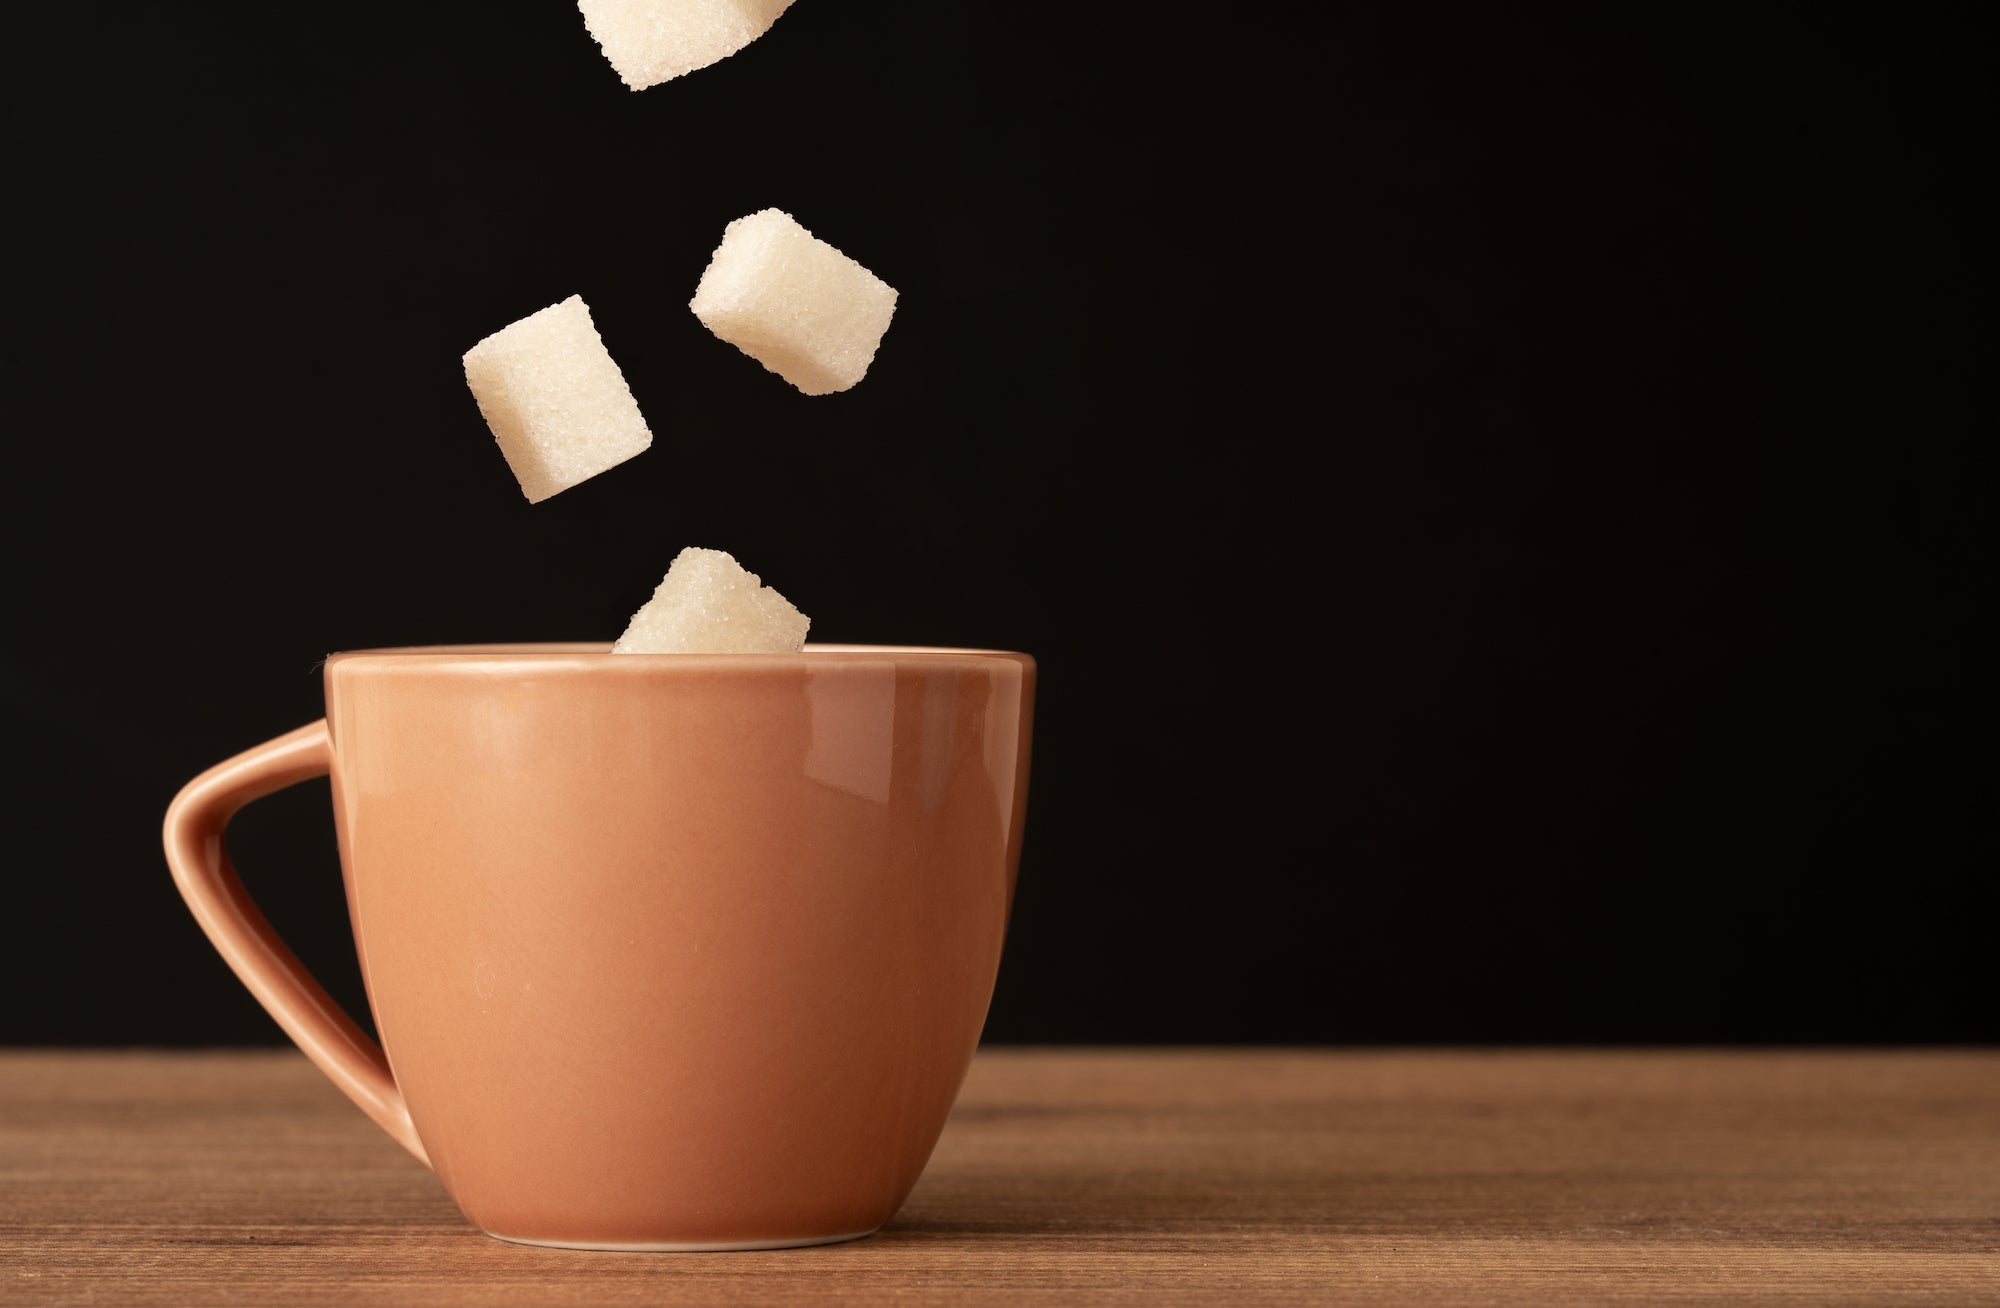 The Best Sugar-Free Coffee Tips To Kick Your Sugar Habit